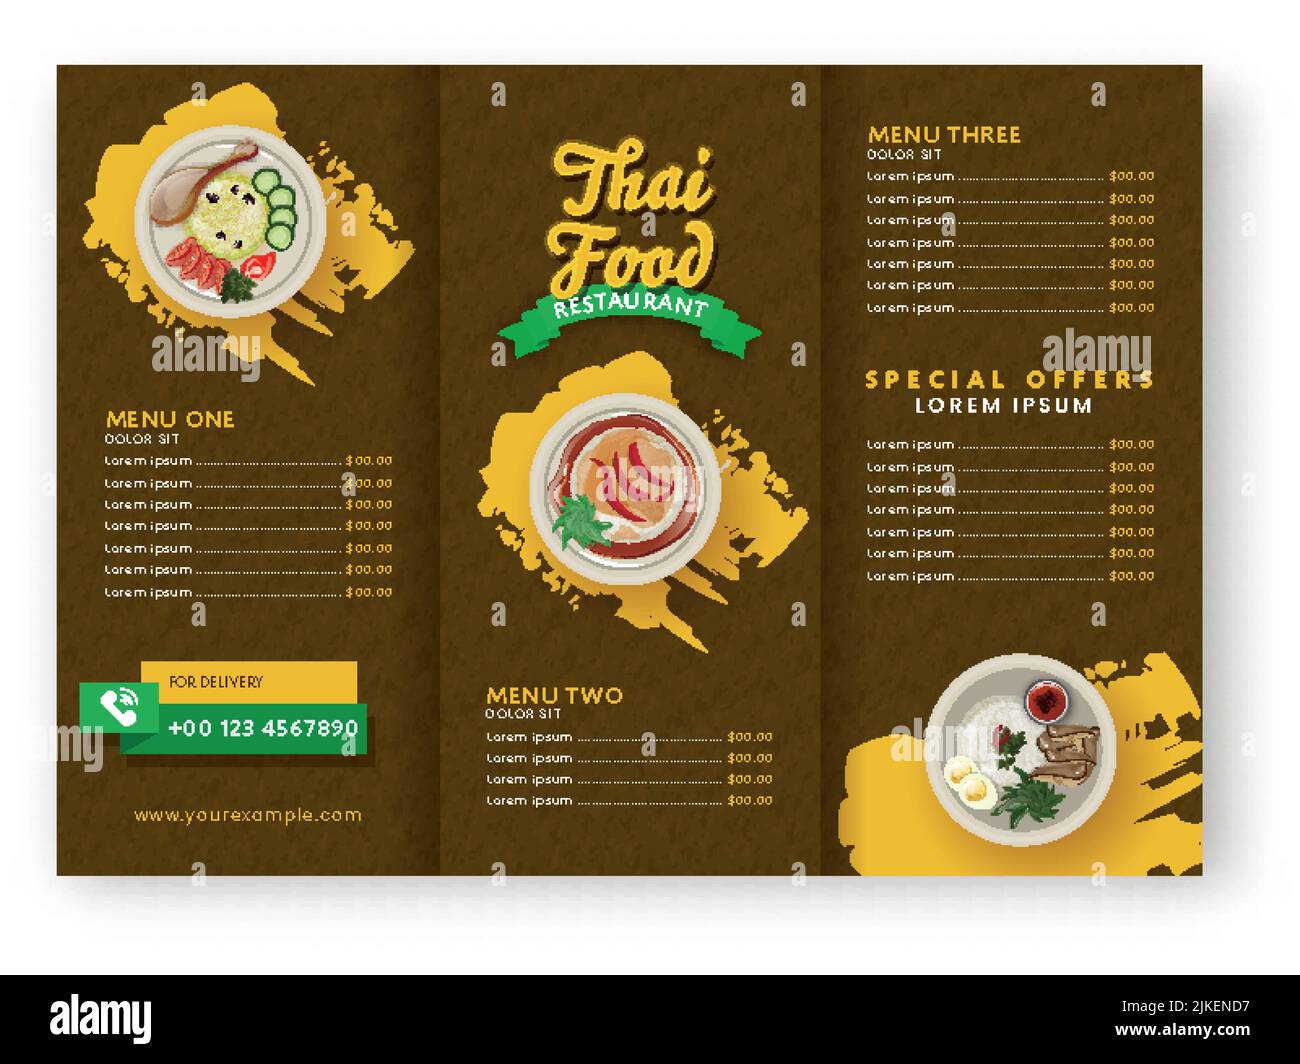 Thai Food Restaurant Menu Card Trifold Brochure With Presented Dishes In Brown And Yellow Color. Stock Vector